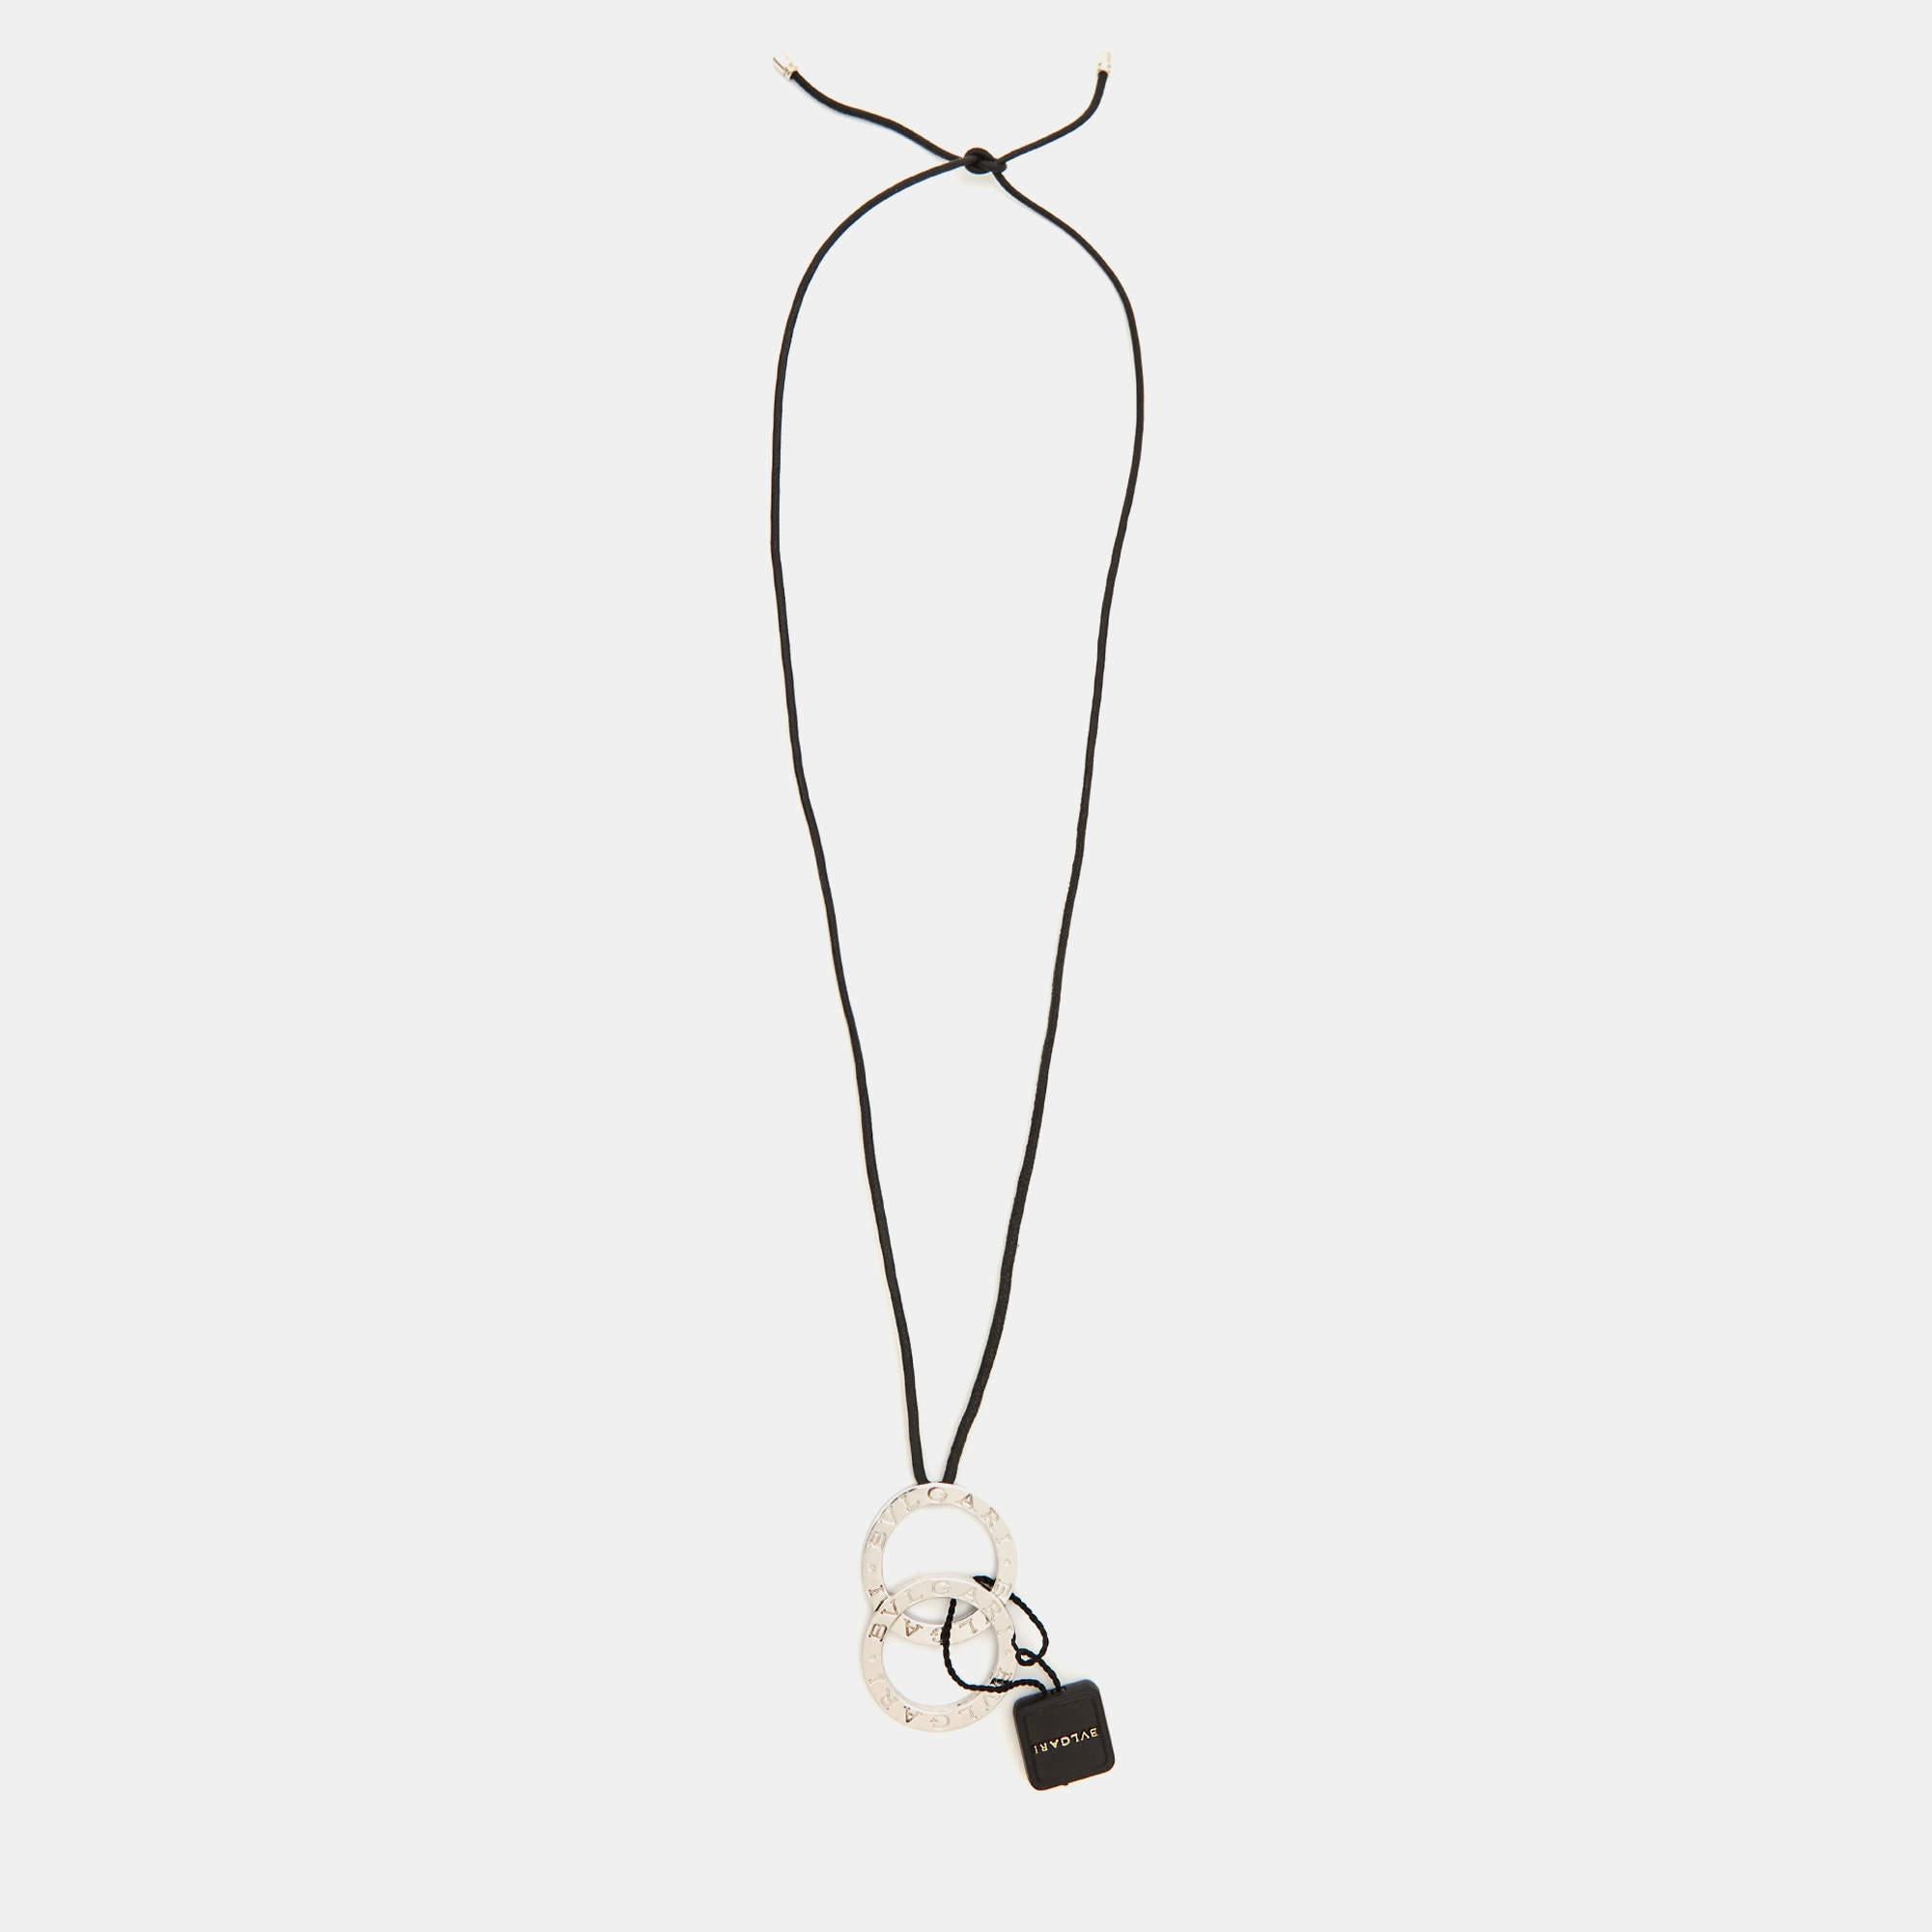 The Bvlgari Fortuna Grande is an exquisite necklace featuring a classy design. It showcases a sterling silver pendant with the iconic Bvlgari logo and a black cord holding it, creating an accessory you can wear with T-shirts to dresses.

